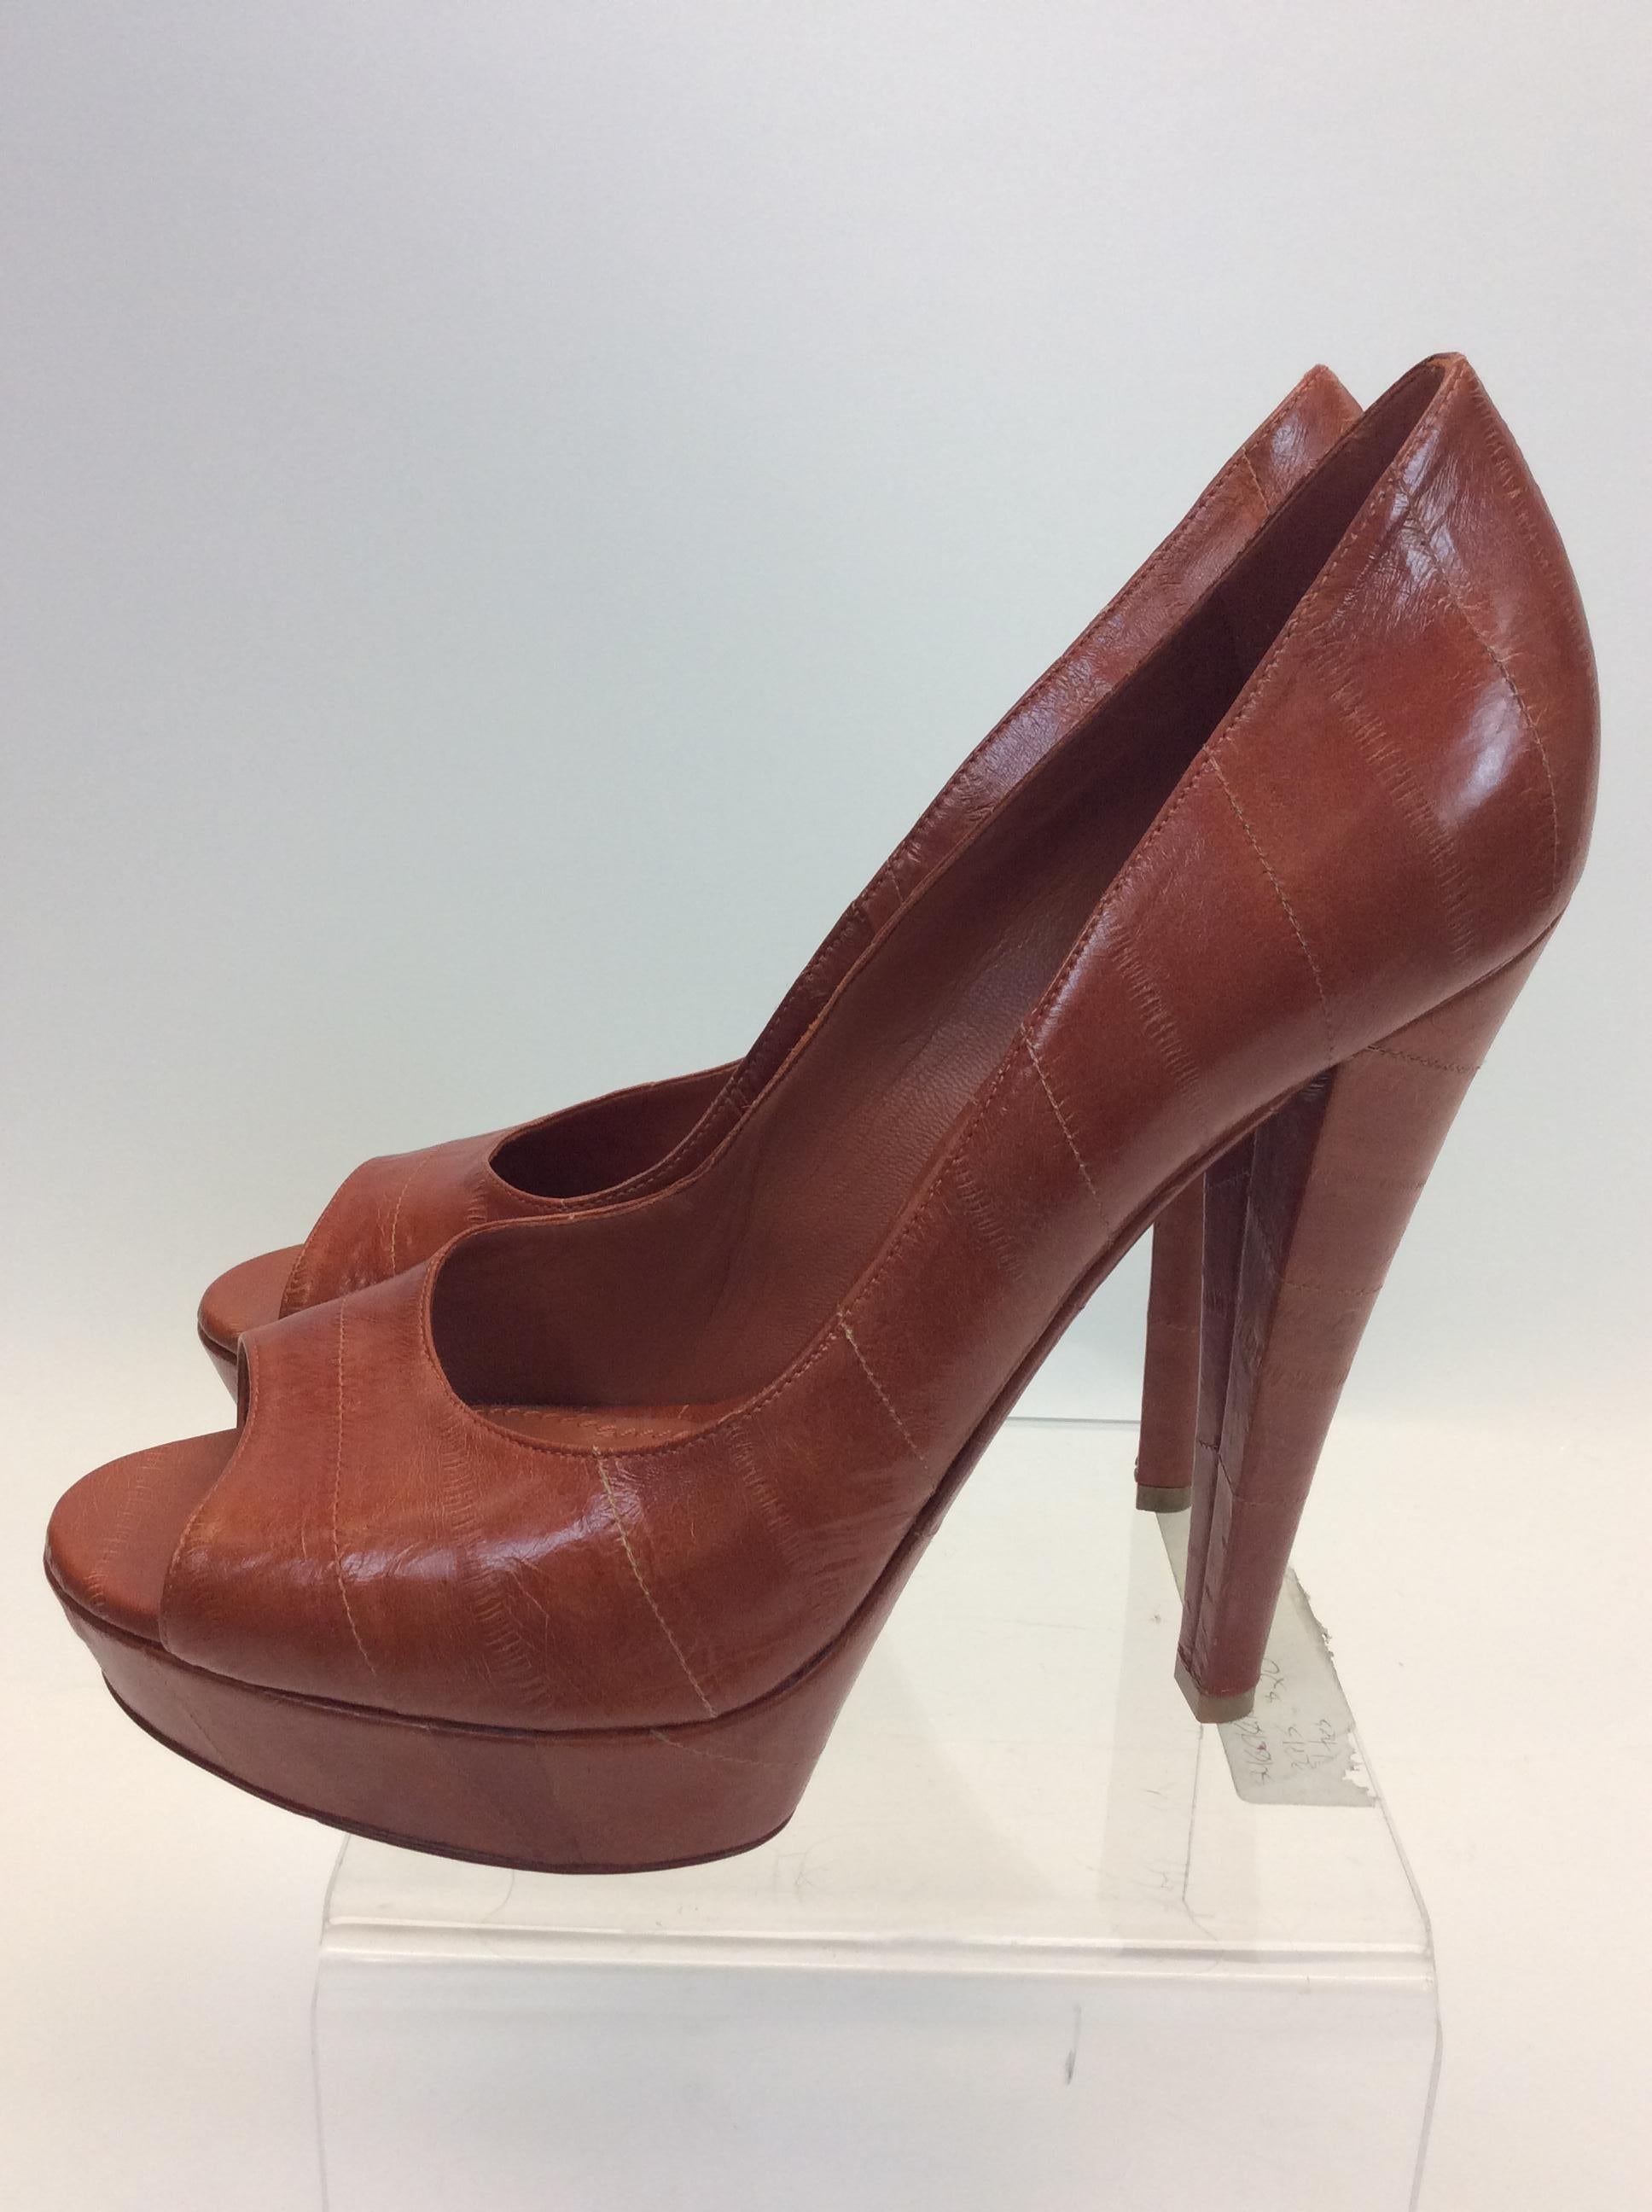 Yves Saint Laurent Rust Orange Leather Peep Toe Pumps In Good Condition For Sale In Narberth, PA